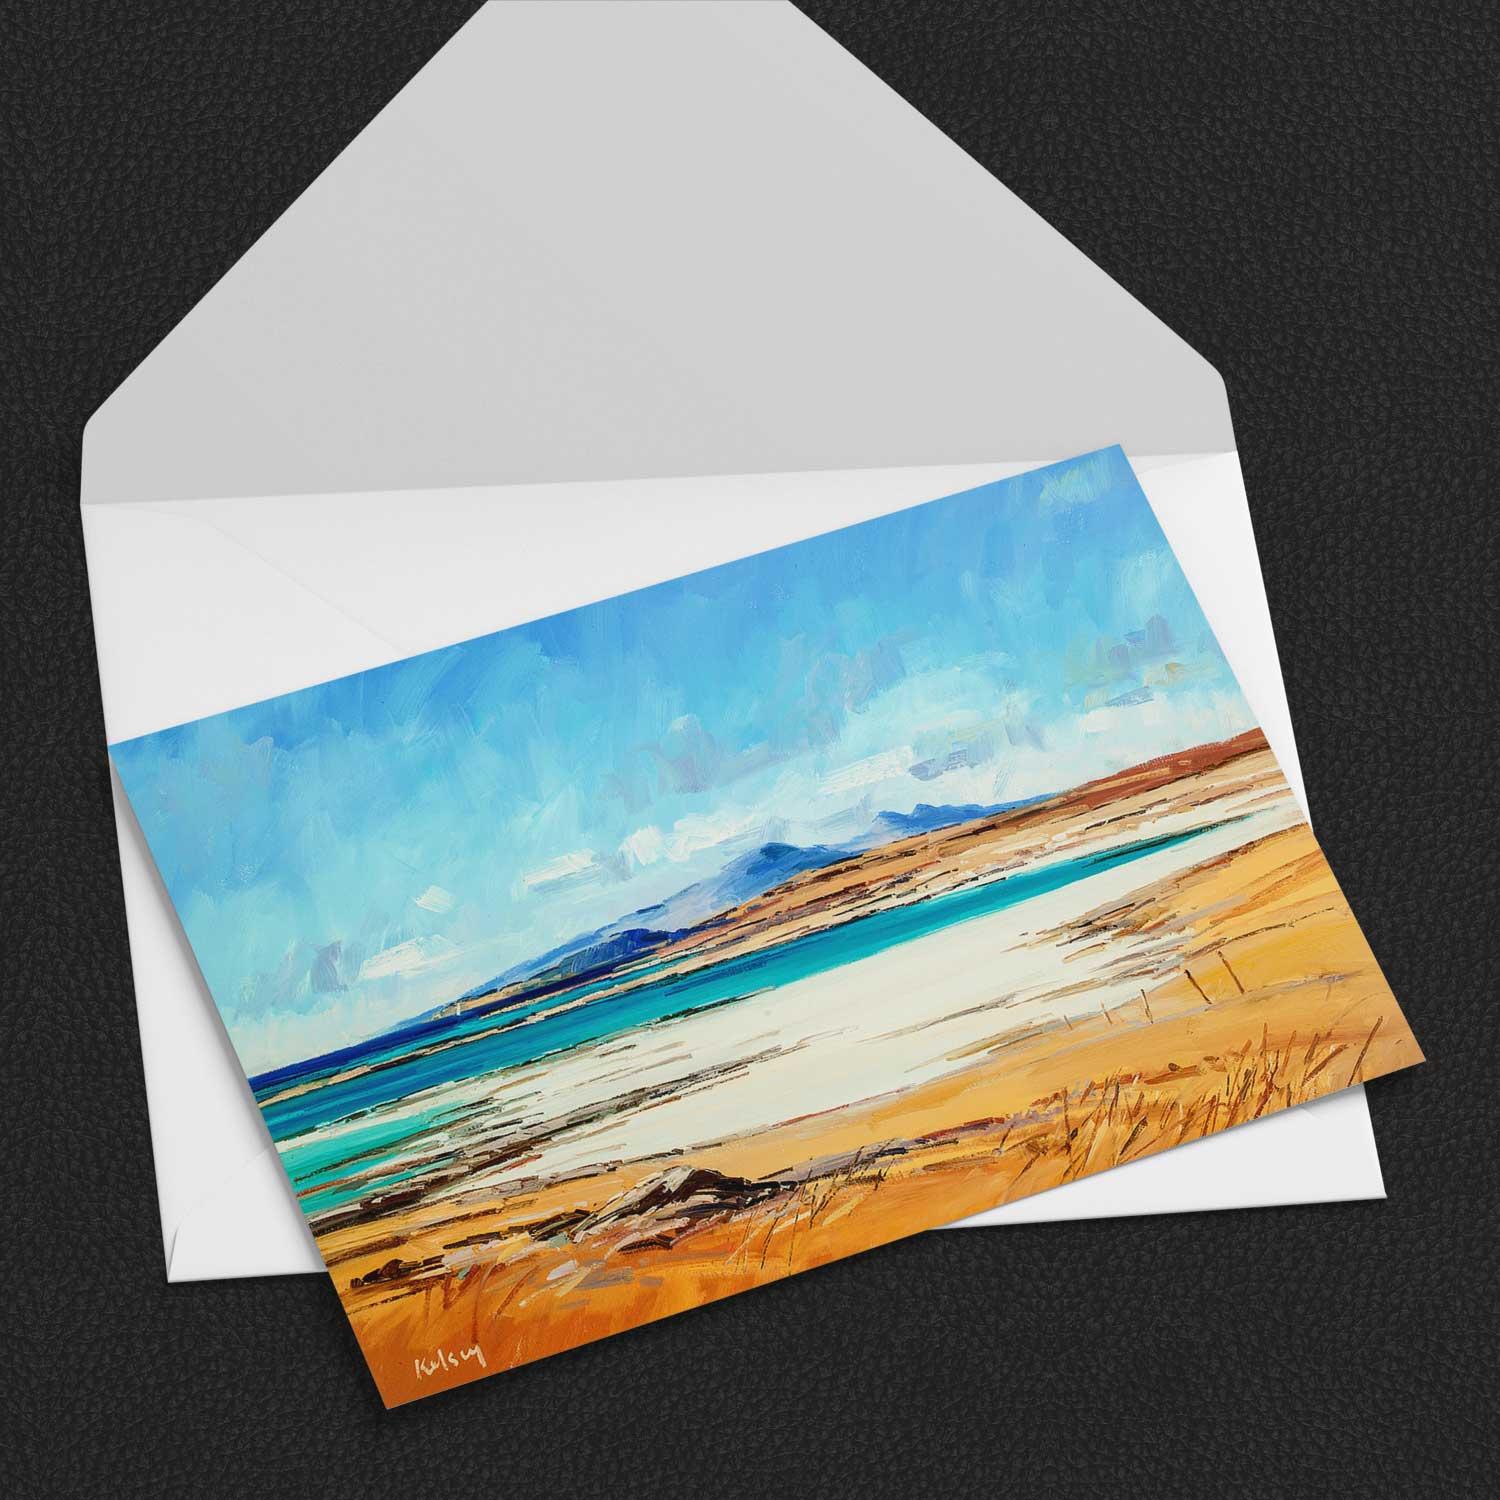 Sanna Bay Greeting Card from an original painting by artist Robert Kelsey